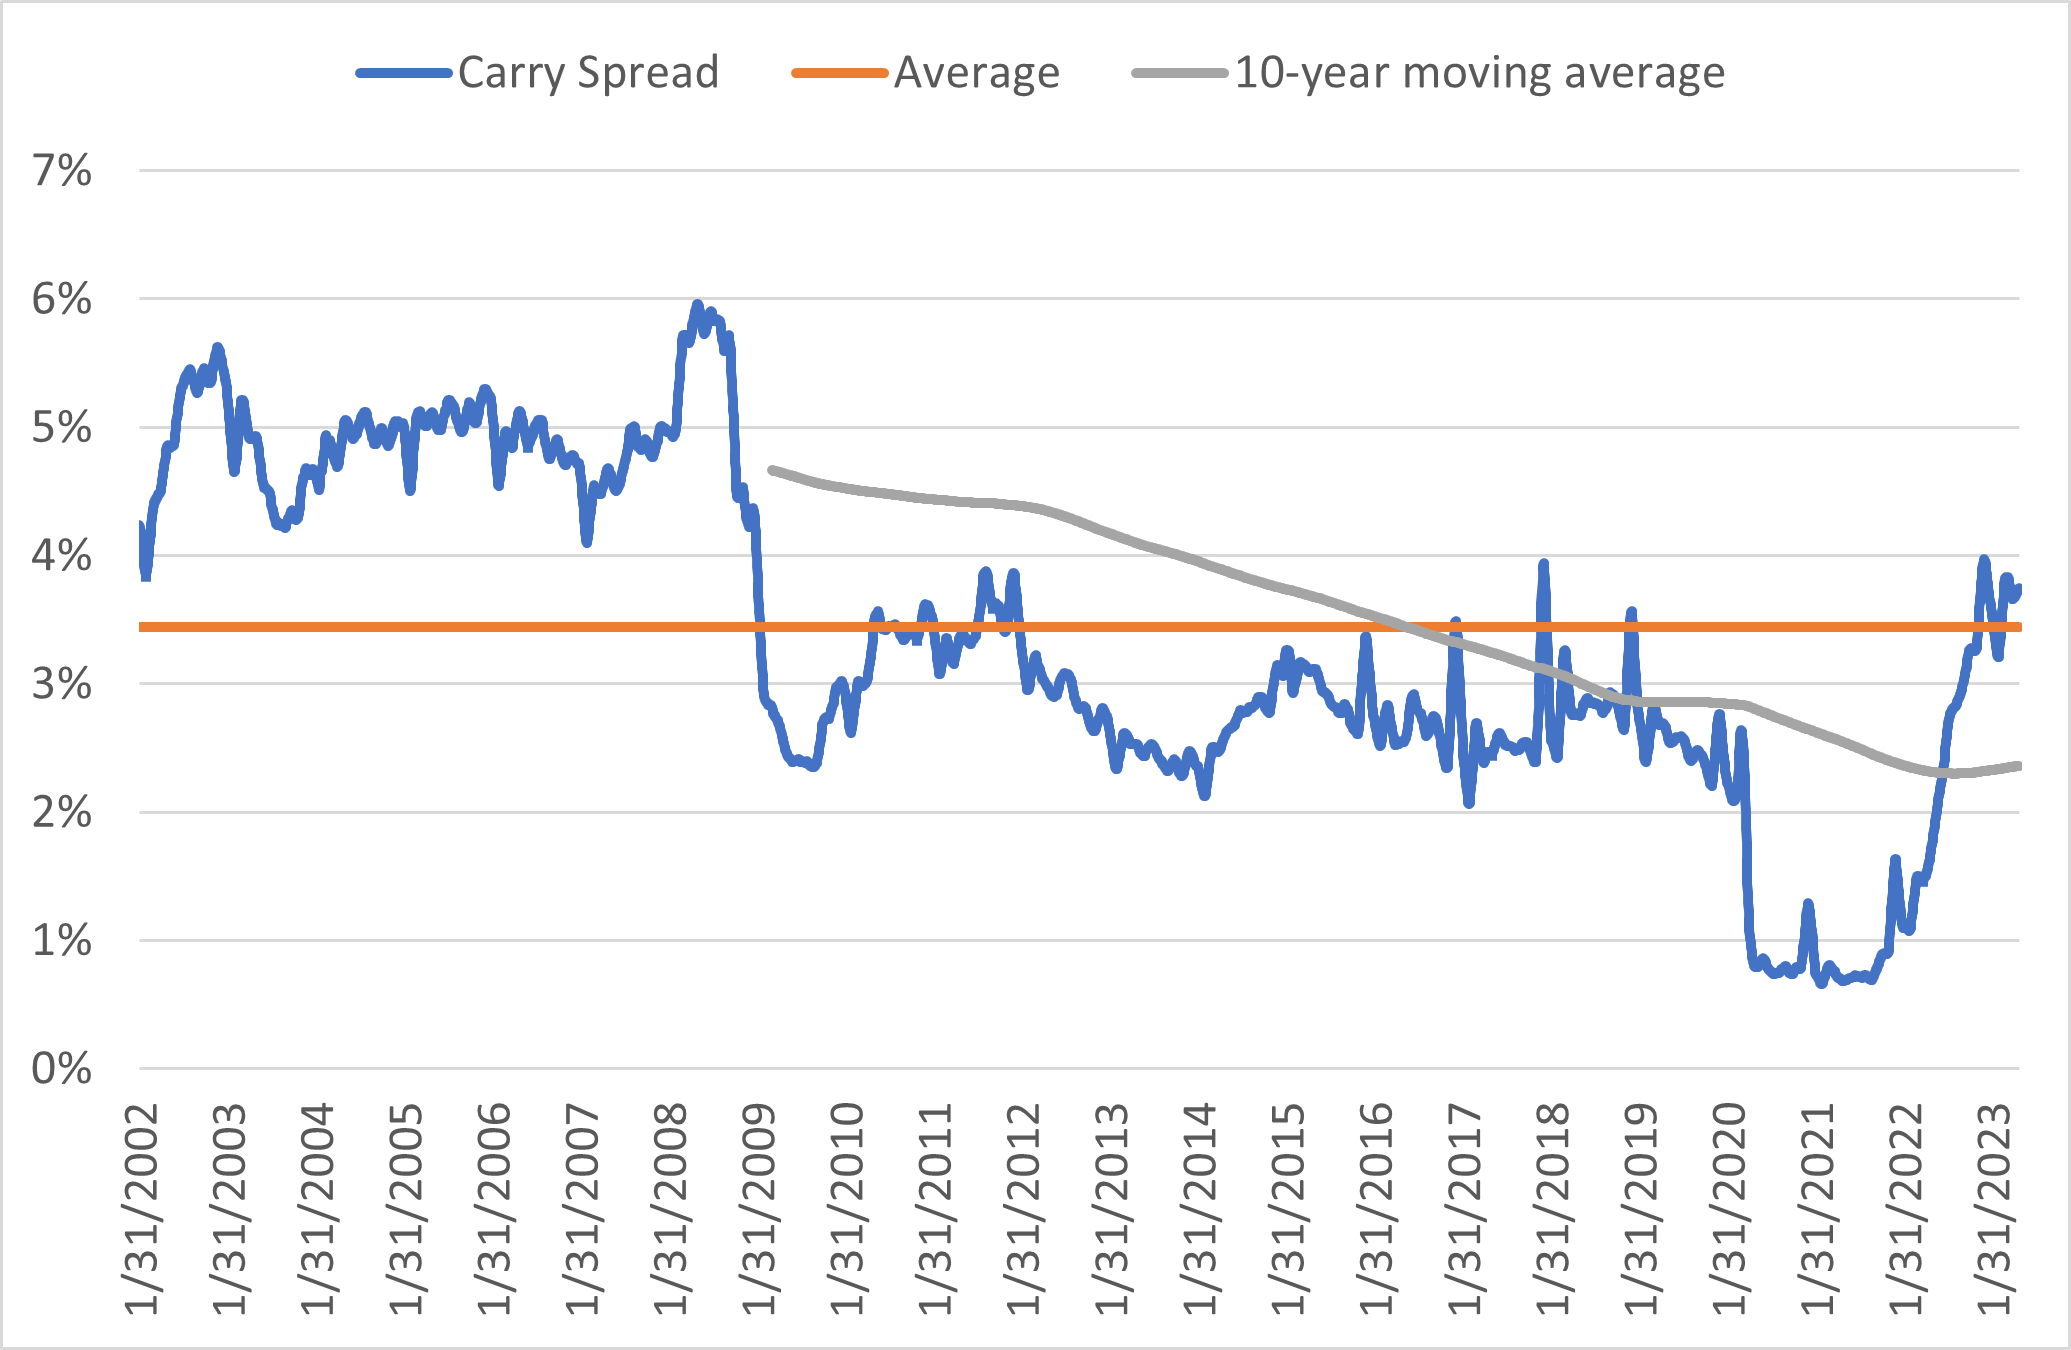 Carry spread and averages